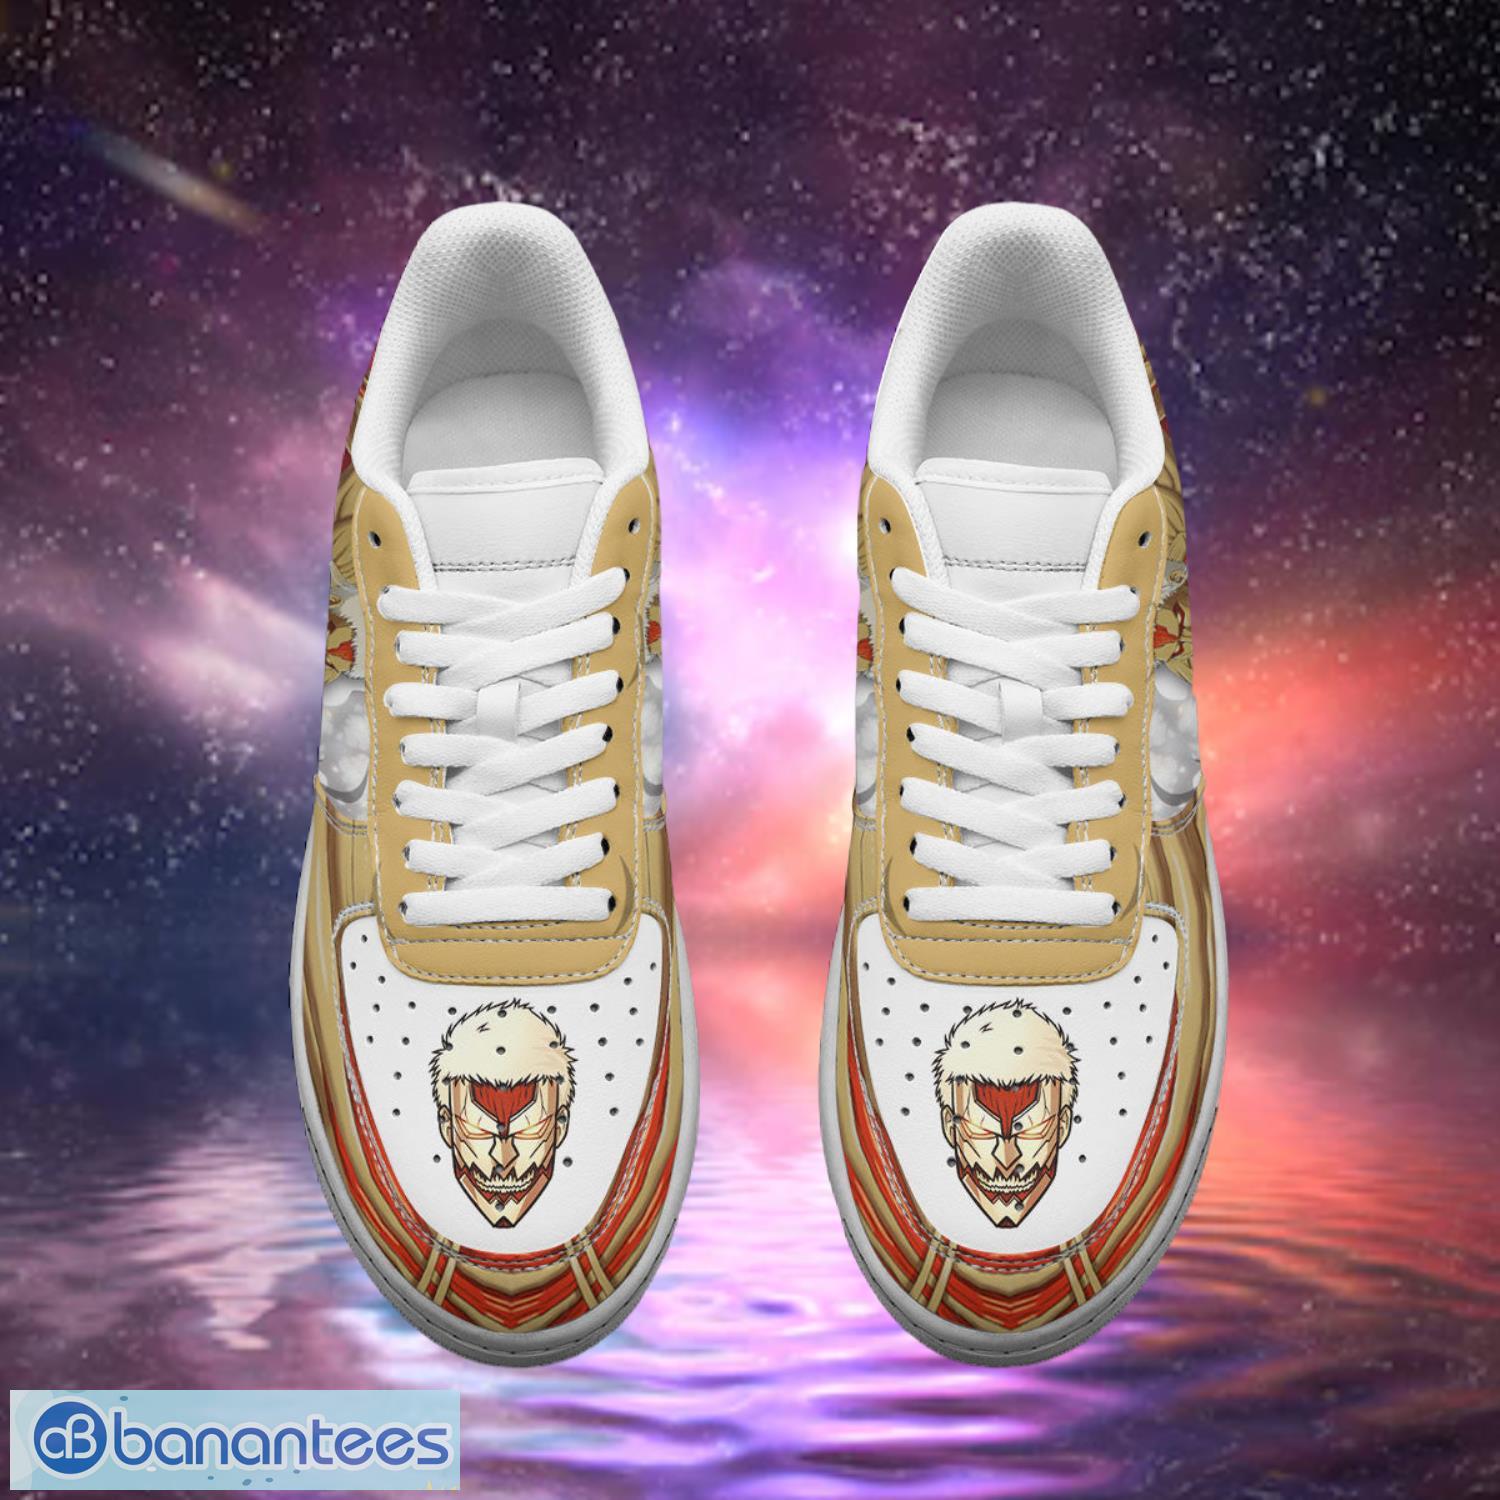 Attack On Titan Amored Titan Air Sneakers Custom Anime Shoes Product Photo 2